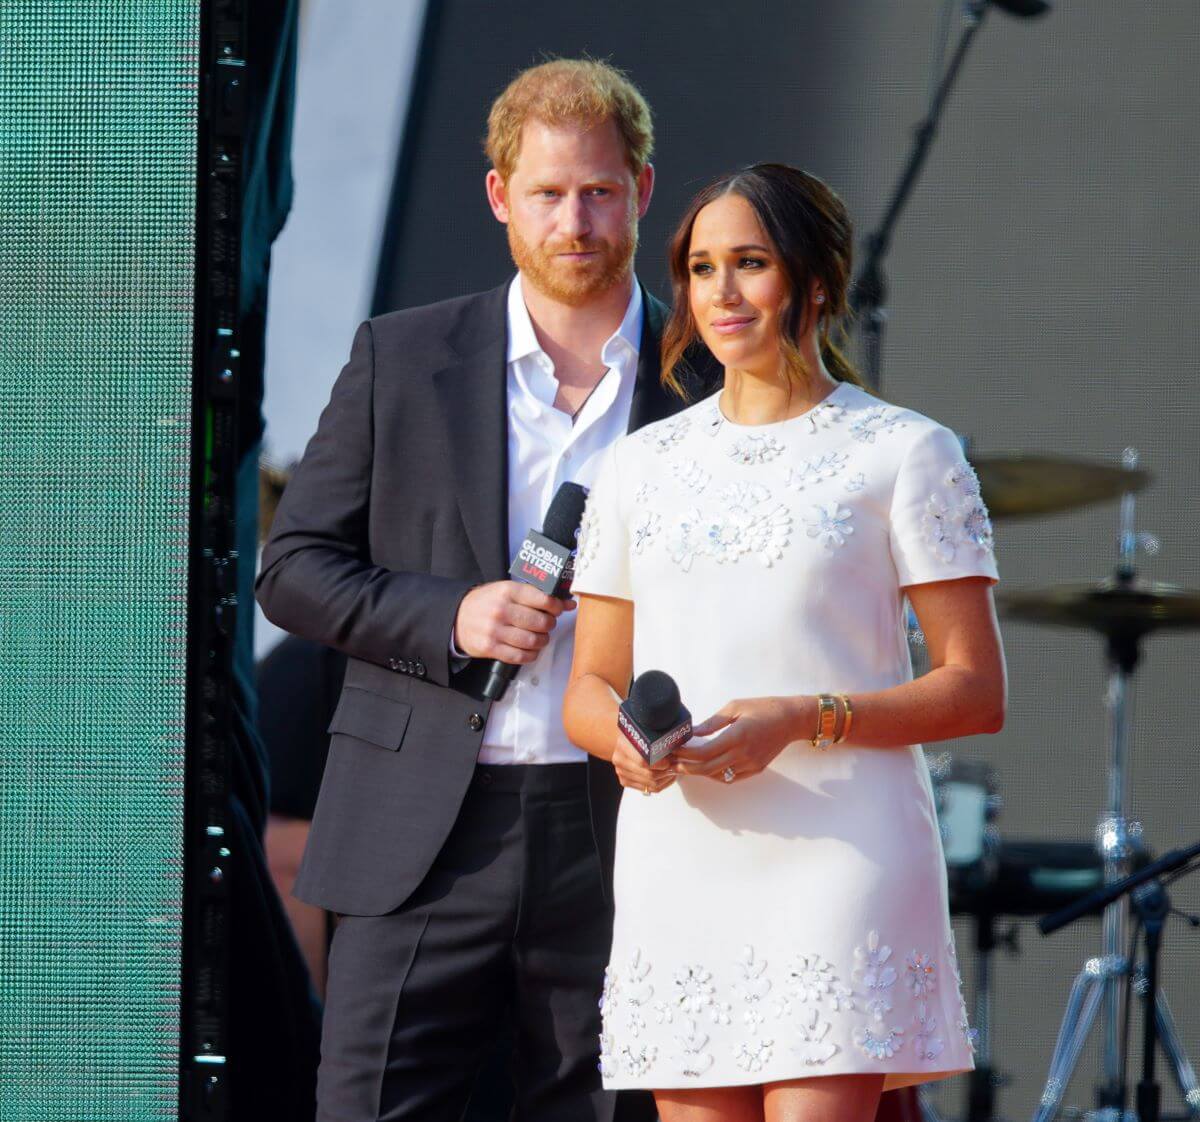 Prince Harry and Meghan Markle speak on stage at Global Citizen Live New York event